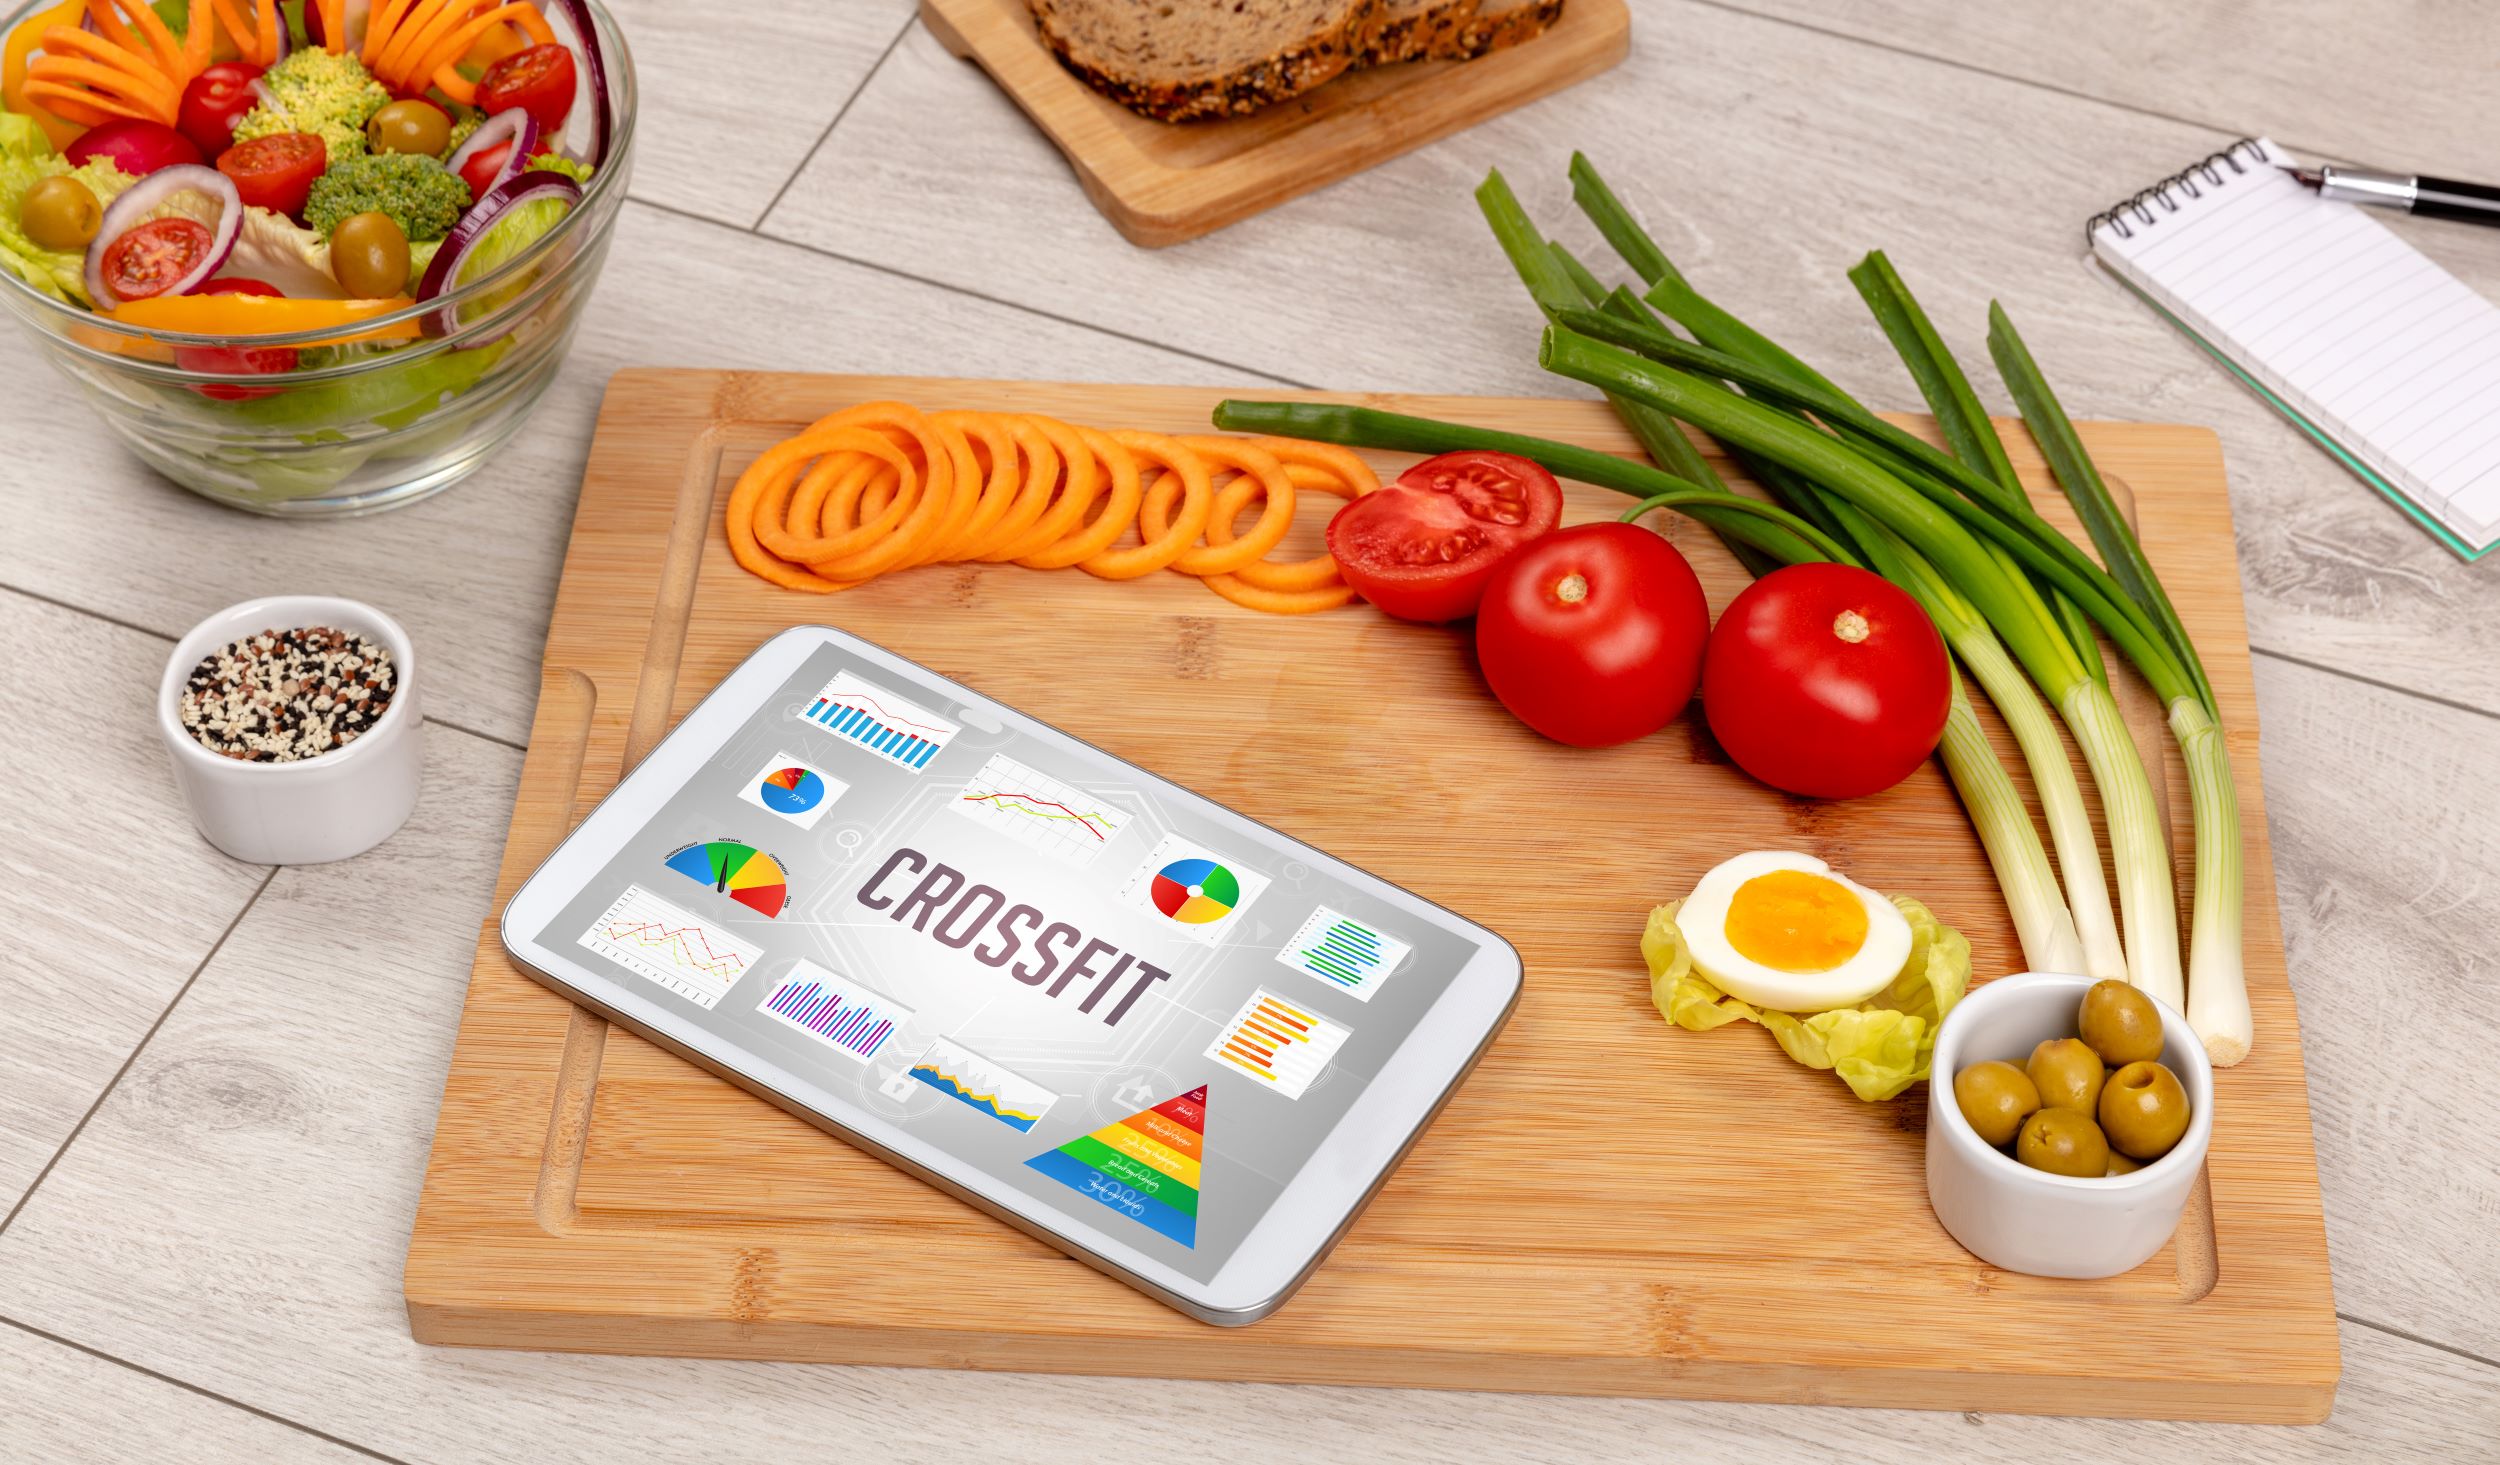 Healthy meal planning with a fitness app on a tablet amid fresh vegetables on a wooden table.